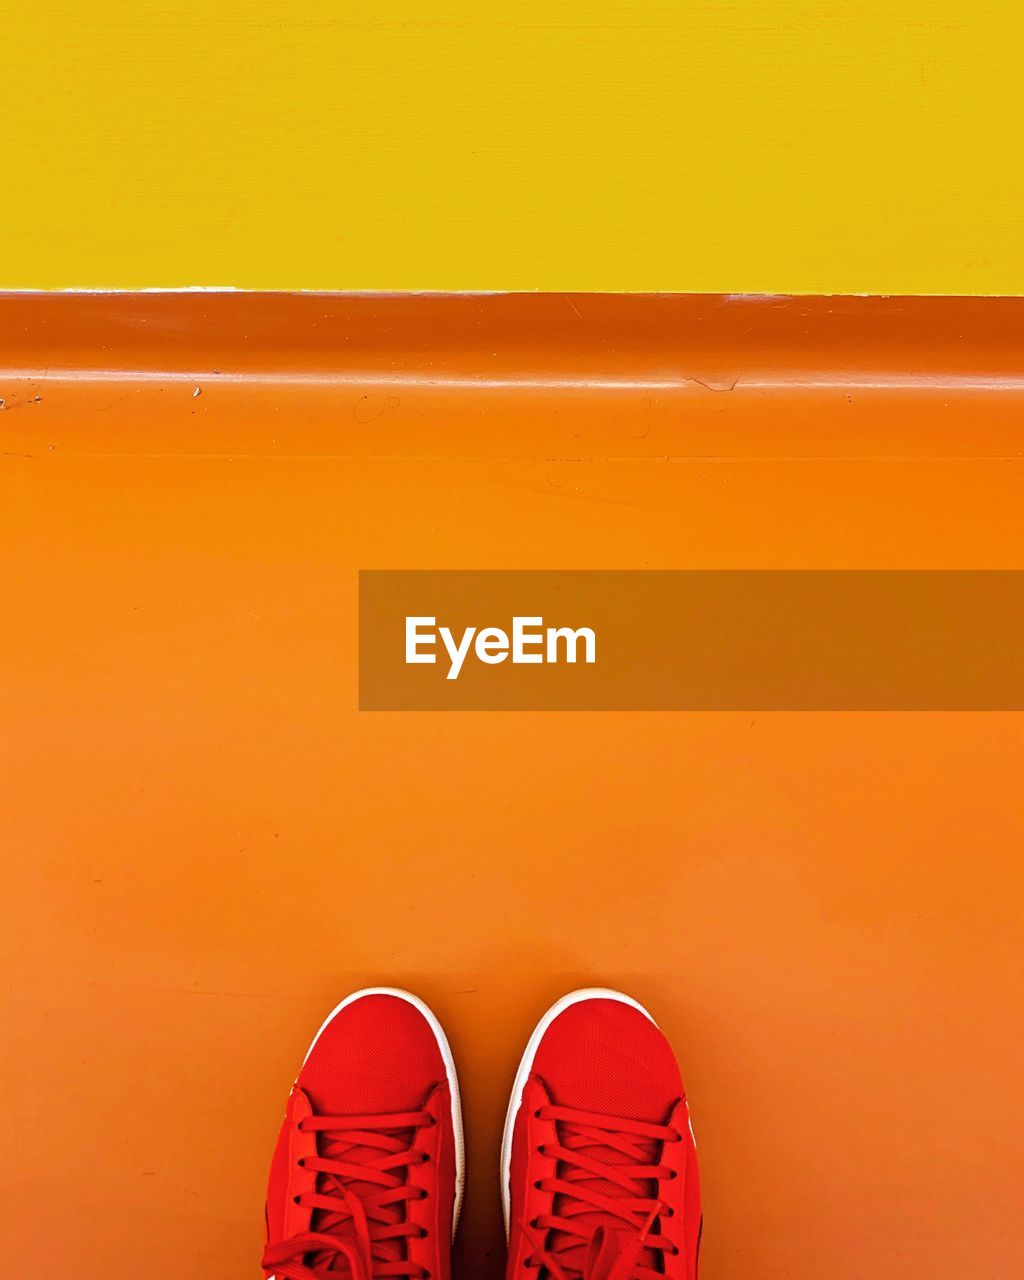 Red shoes on an orange floor with a yellow wall.